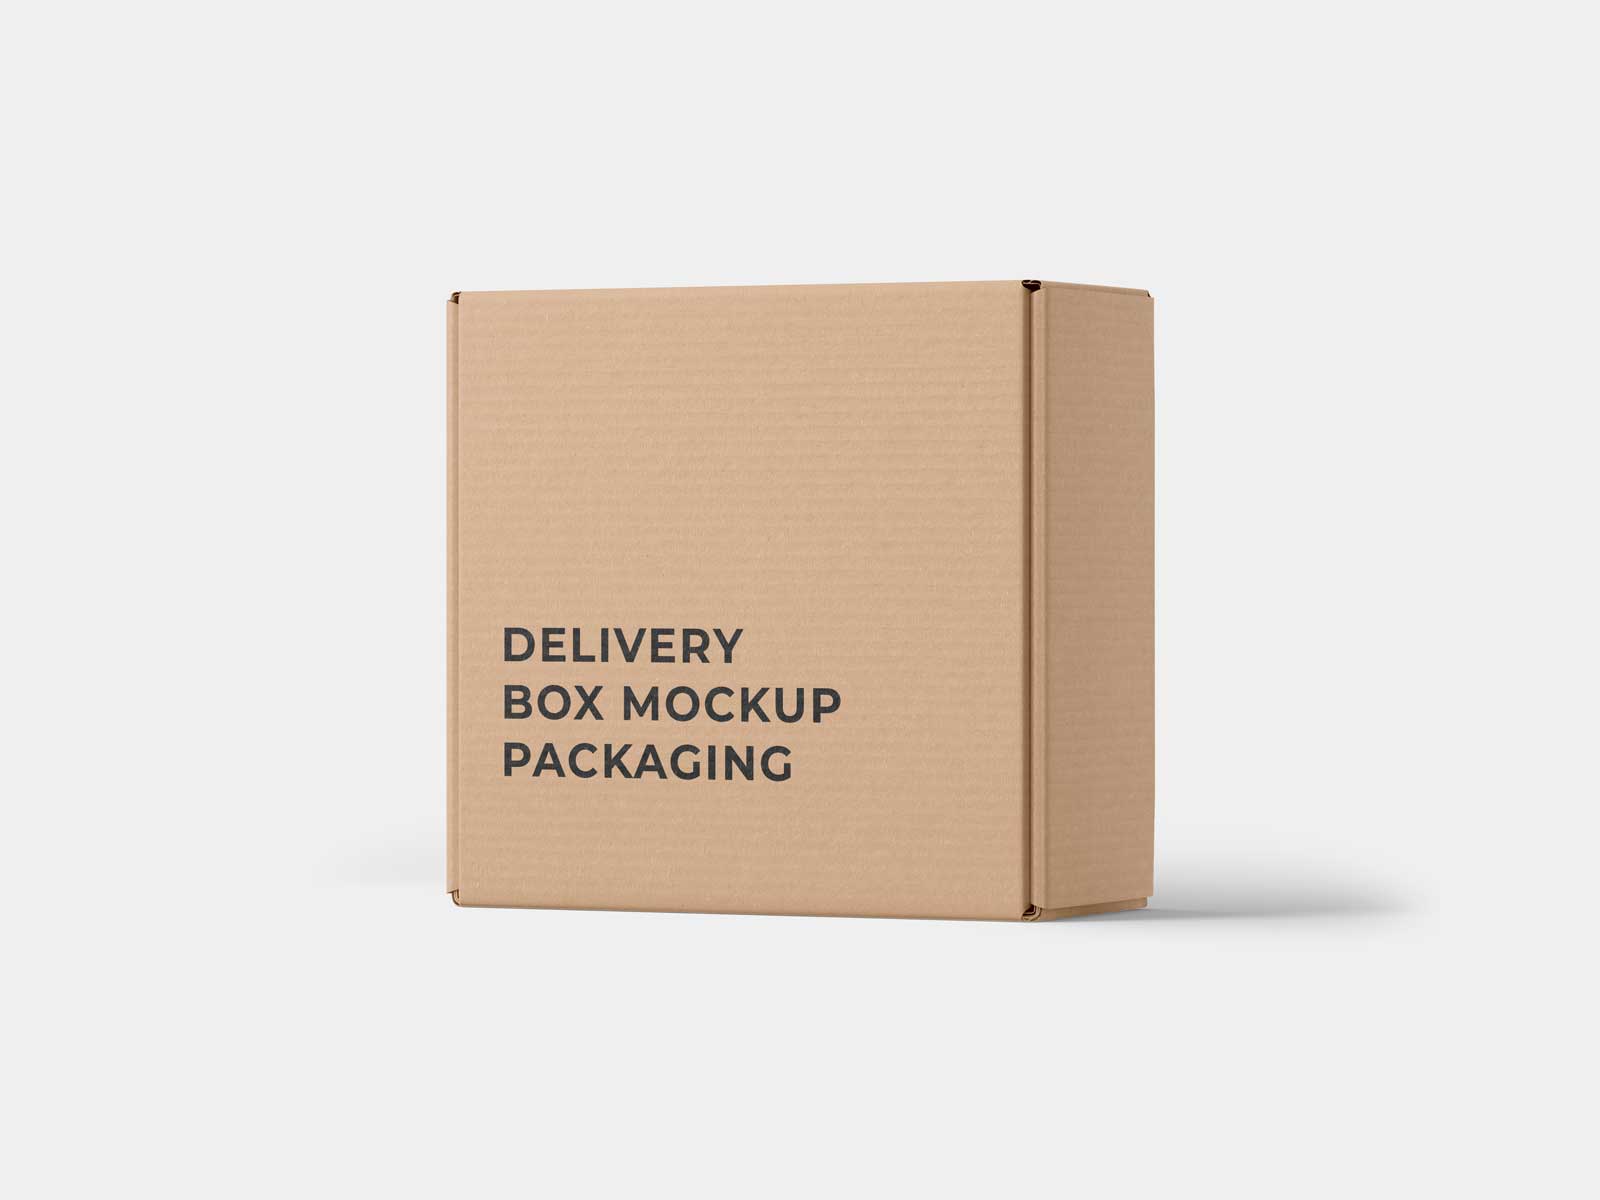 Delivery Box Mockup Packaging: Impress with Seamless Brand Presentation